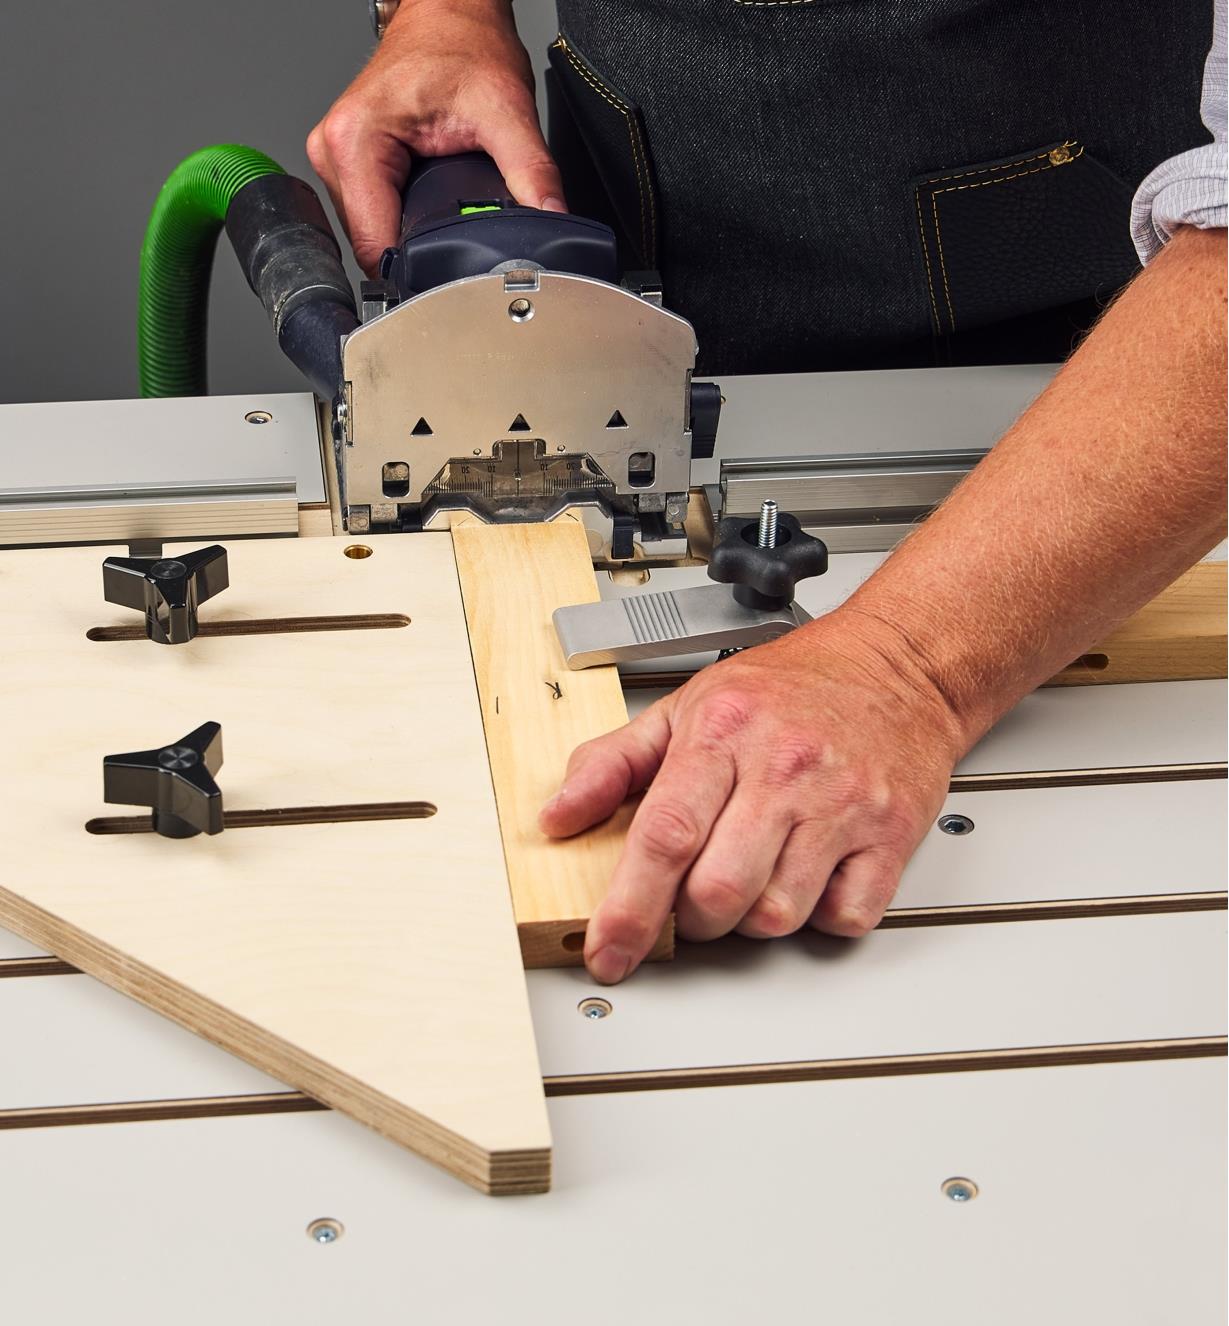 A Domino joiner used on a Veritas Domino joinery table to cut butt-joint mortises in end grain